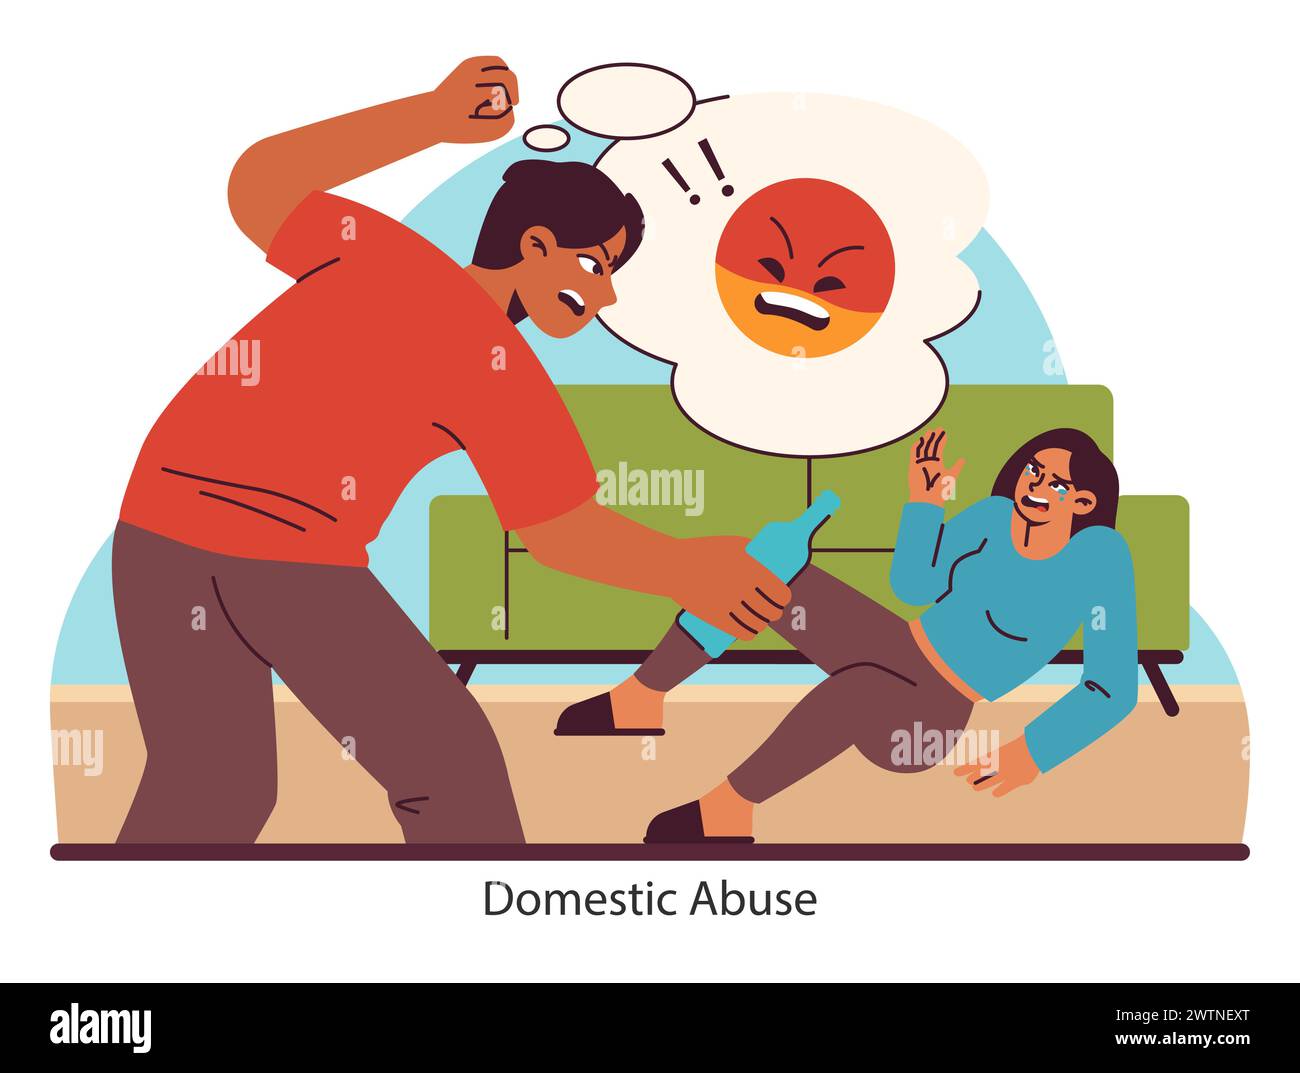 Home conflict. An aggressive figure towers over a frightened person. The grim face of domestic violence and the need for safe havens. Flat vector illustration. Stock Vector